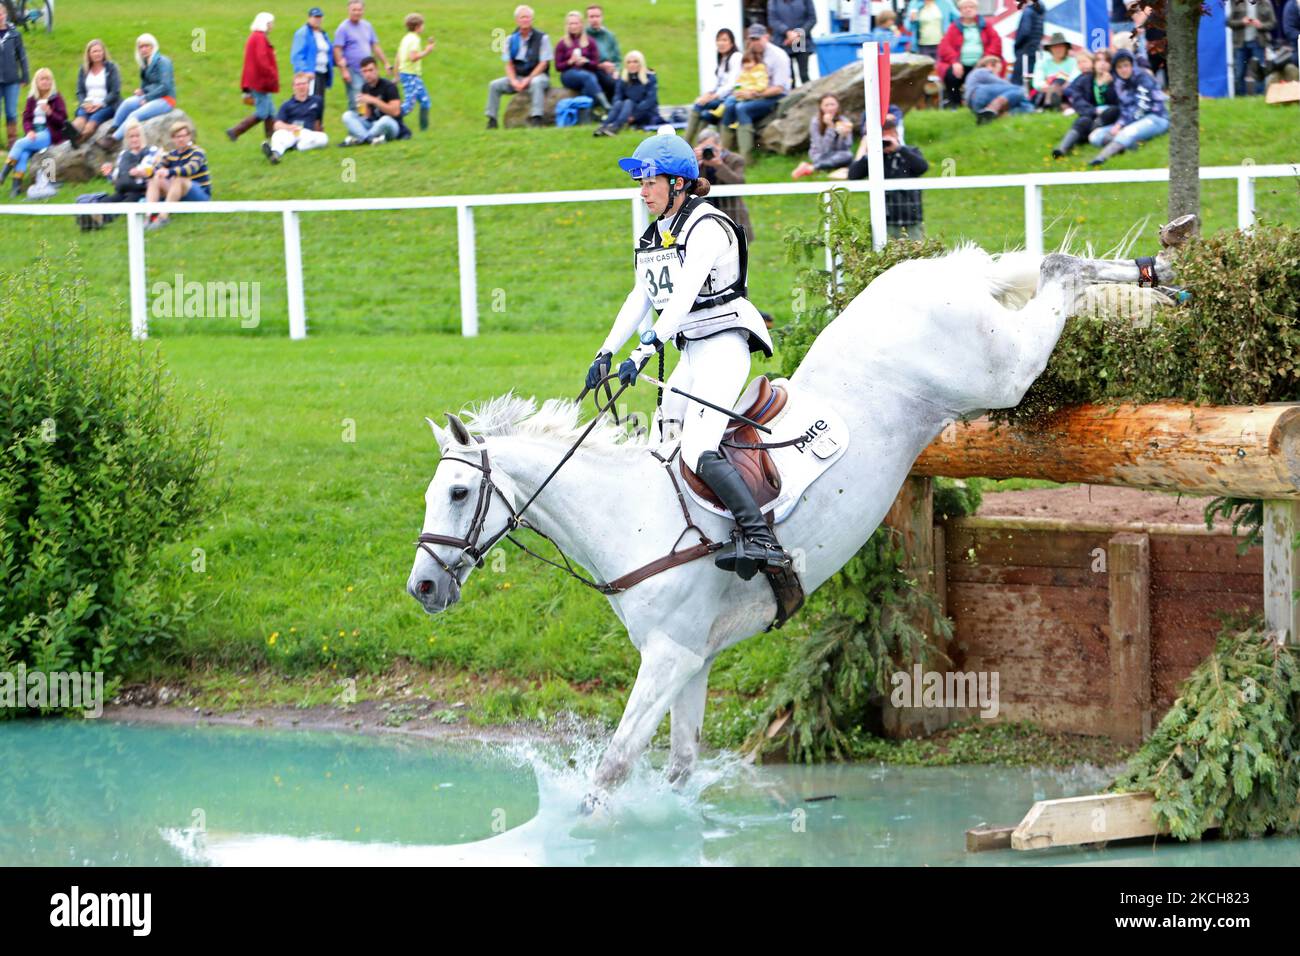 Aisla Wates riding Woodlands Persuasion during 4* Cross Country event at the Barbury Castle International Horse Trials, Marlborough, Wiltshire, UK on Sunday 11th July 2021. (Photo by Jon Bromley/MI News/NurPhoto) Stock Photo